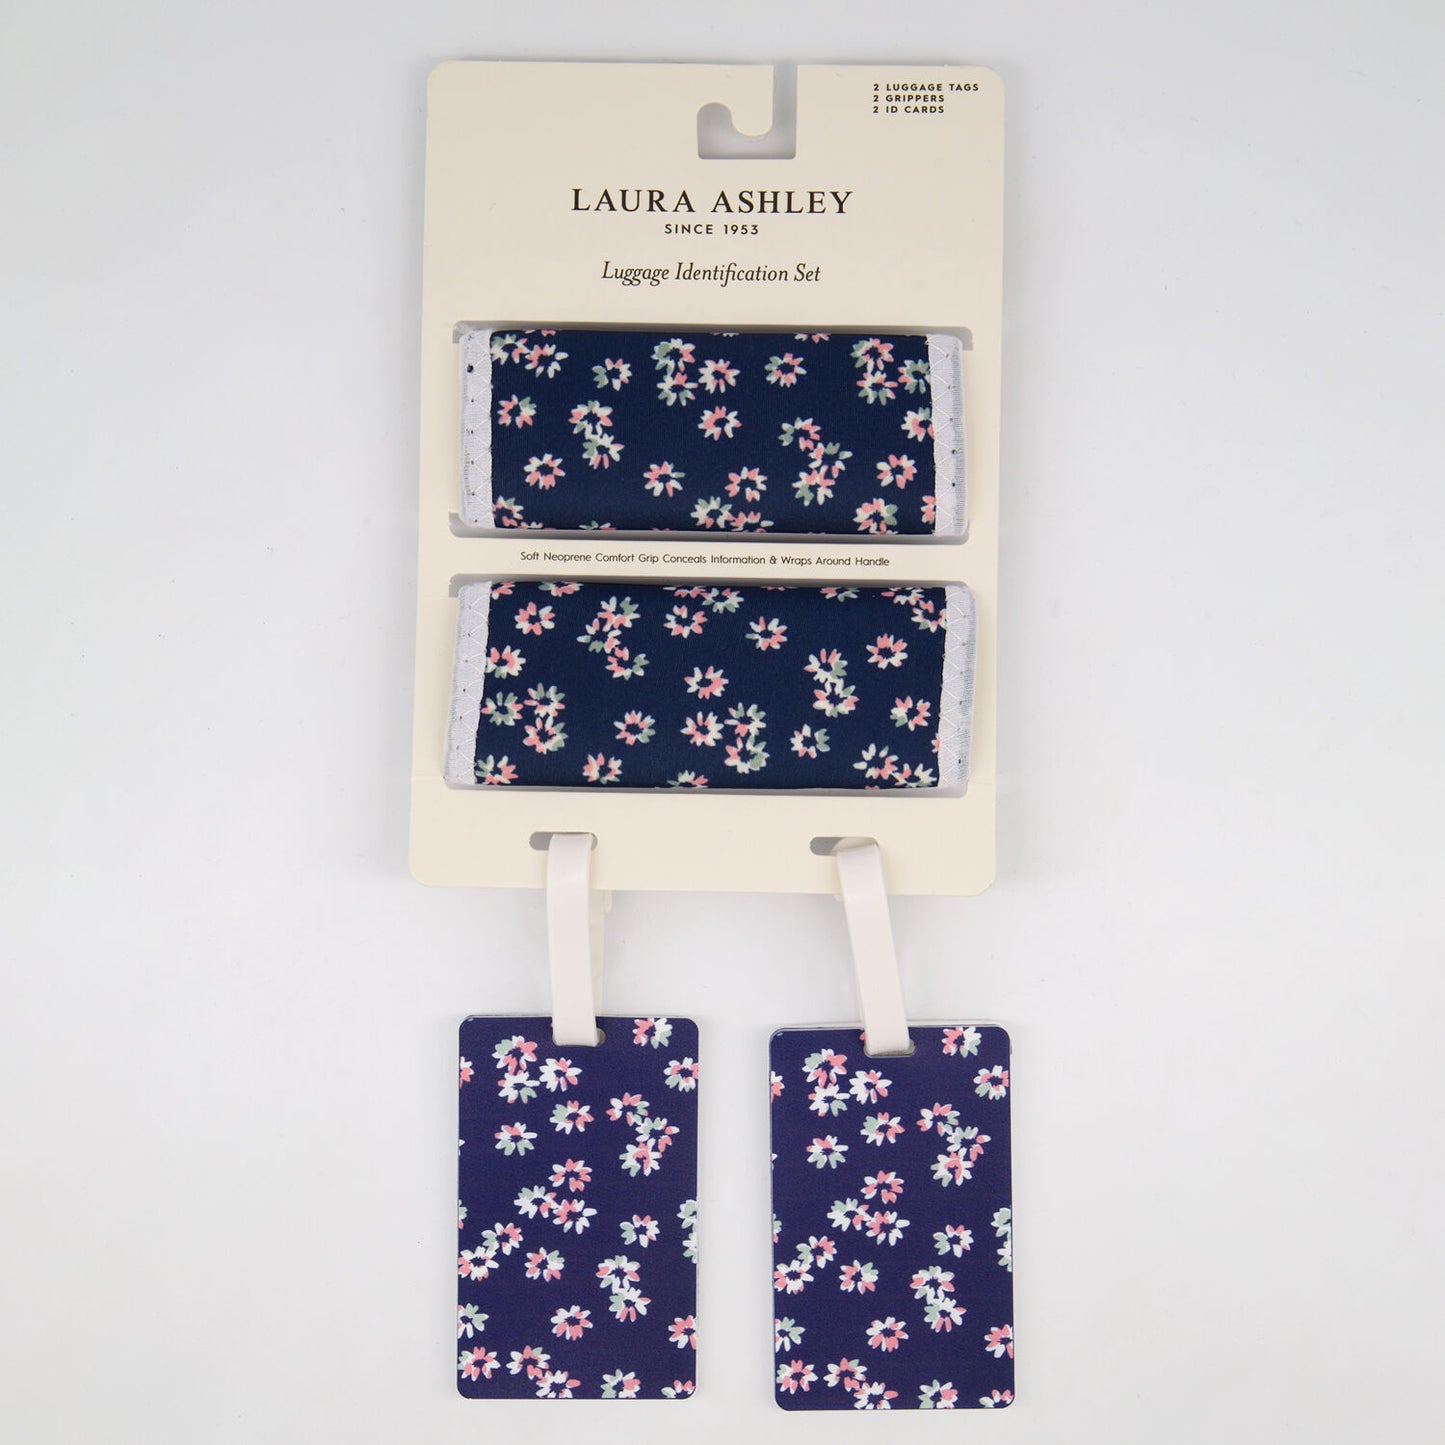 LAURA ASHLEY 4 Pack Navy Luggage Tag & Grips Set